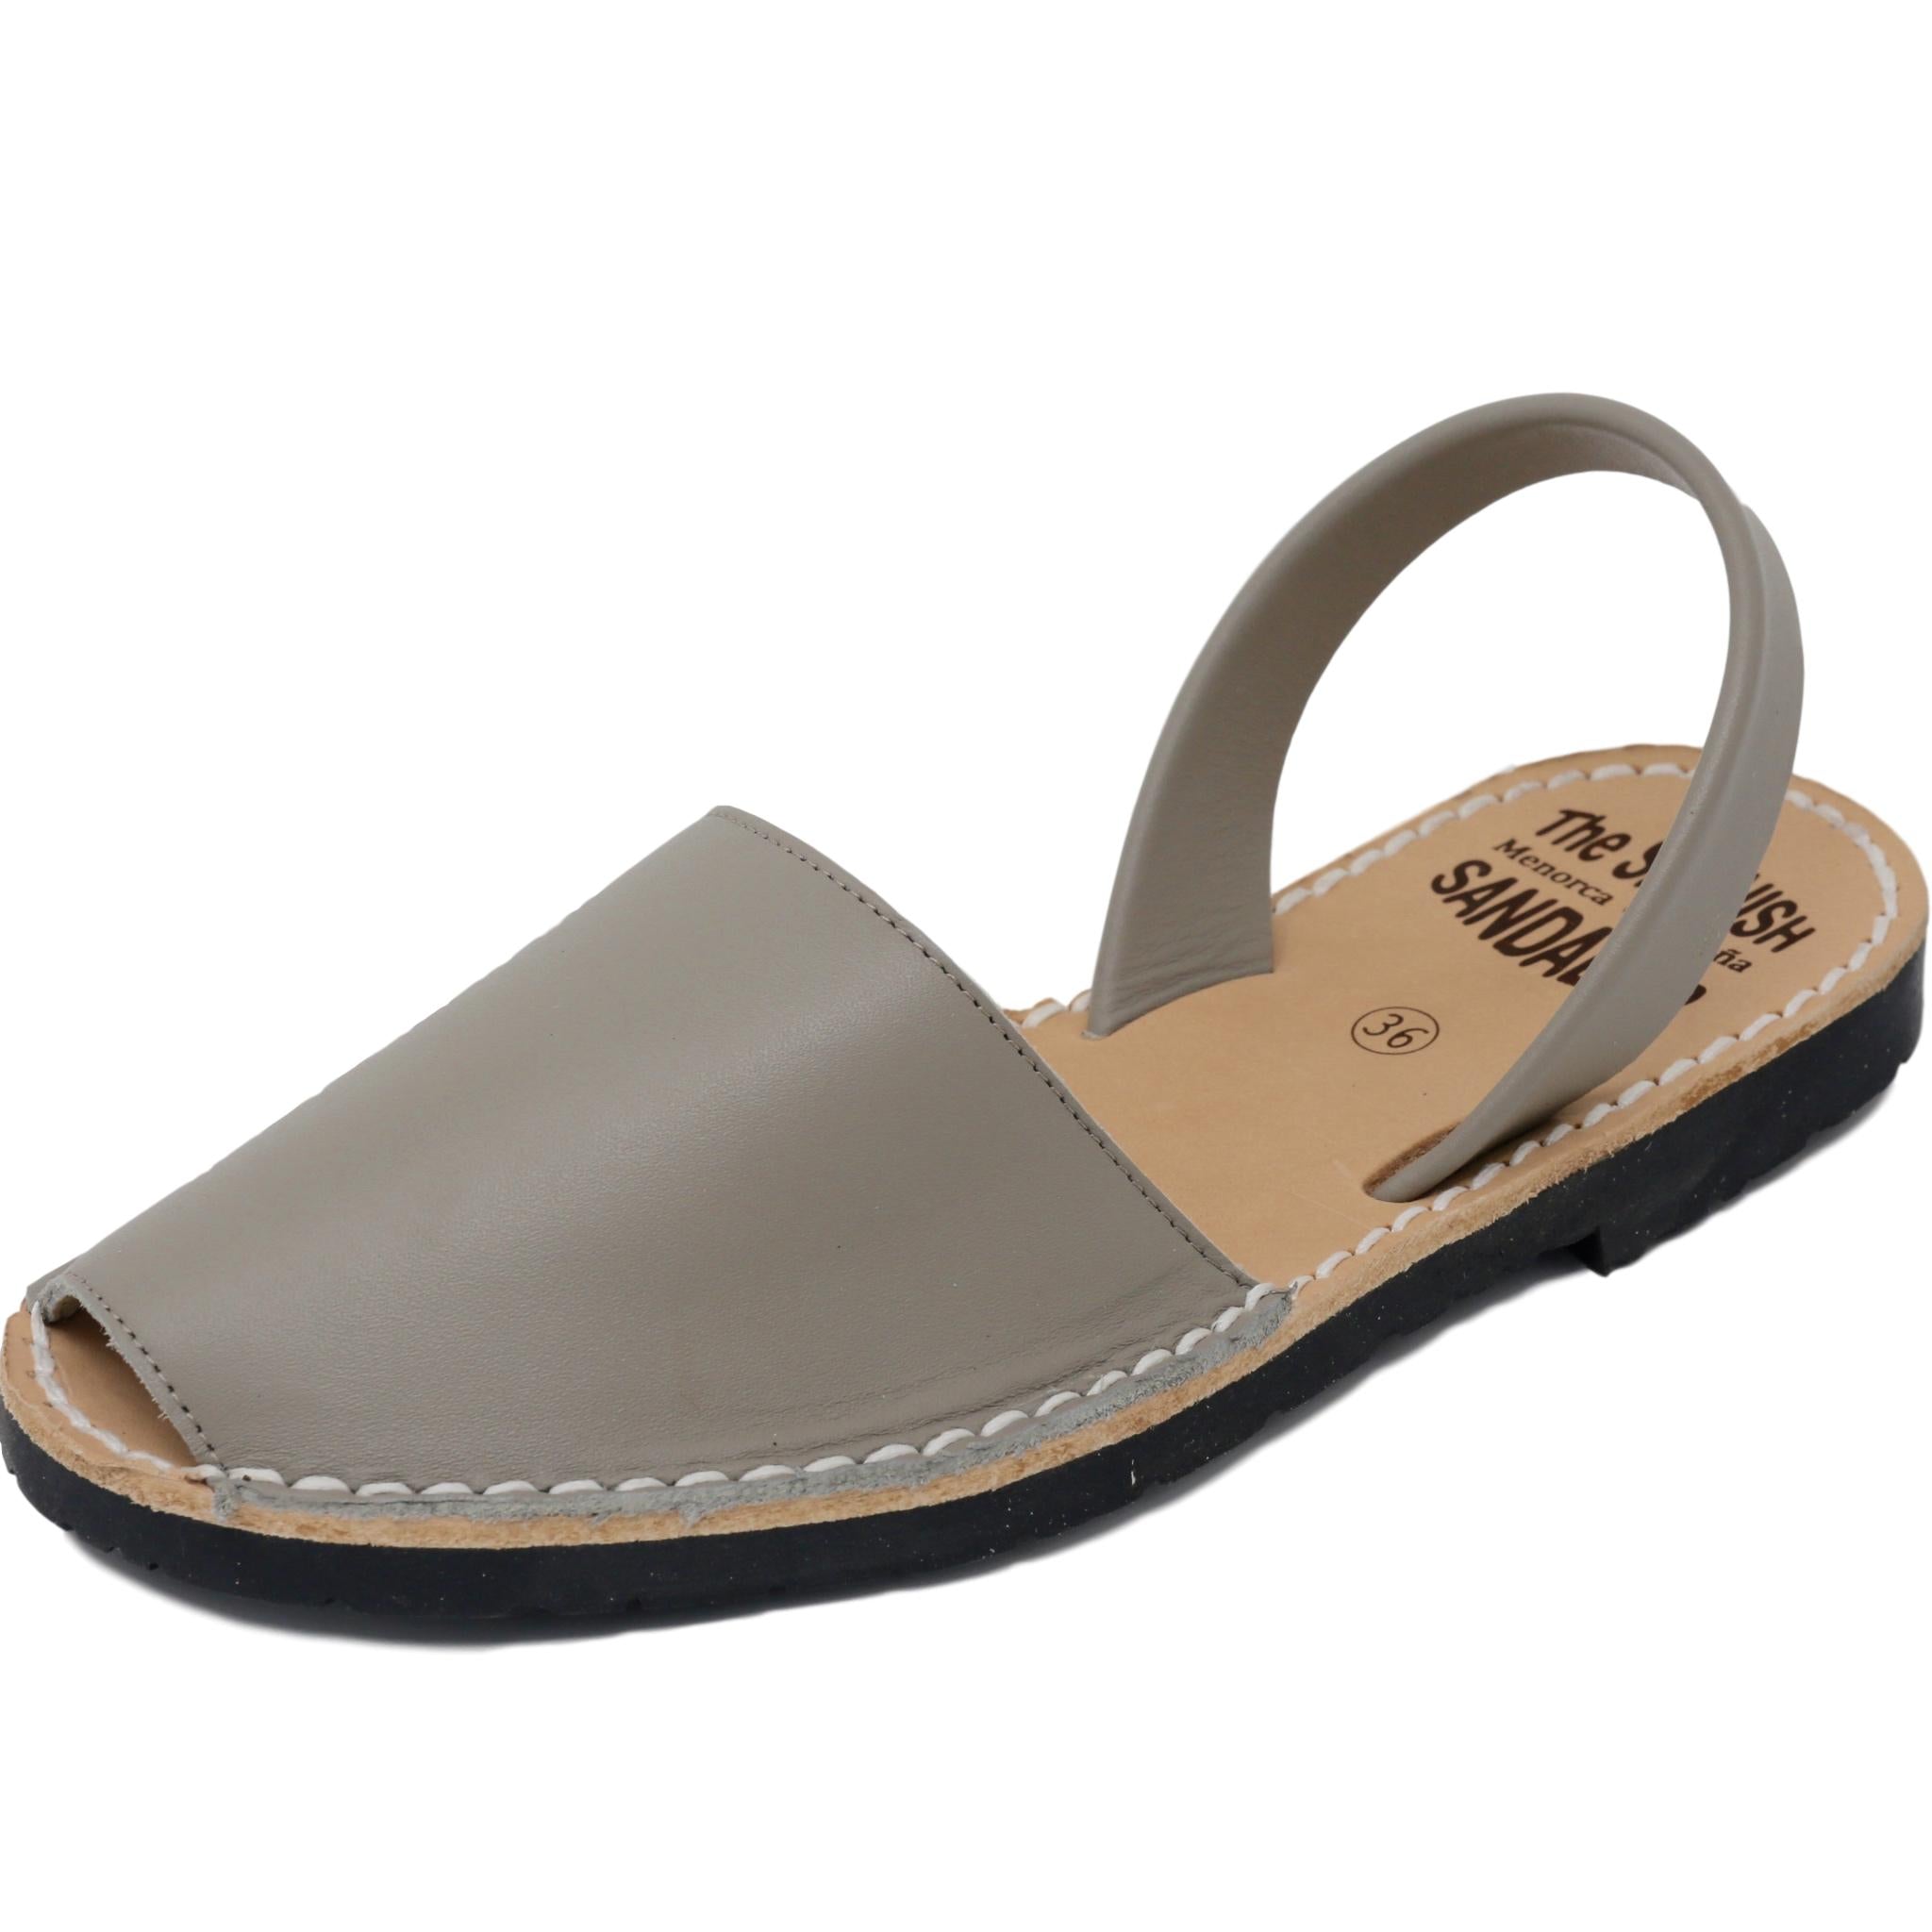 Classic taupe sandals - diagonal view